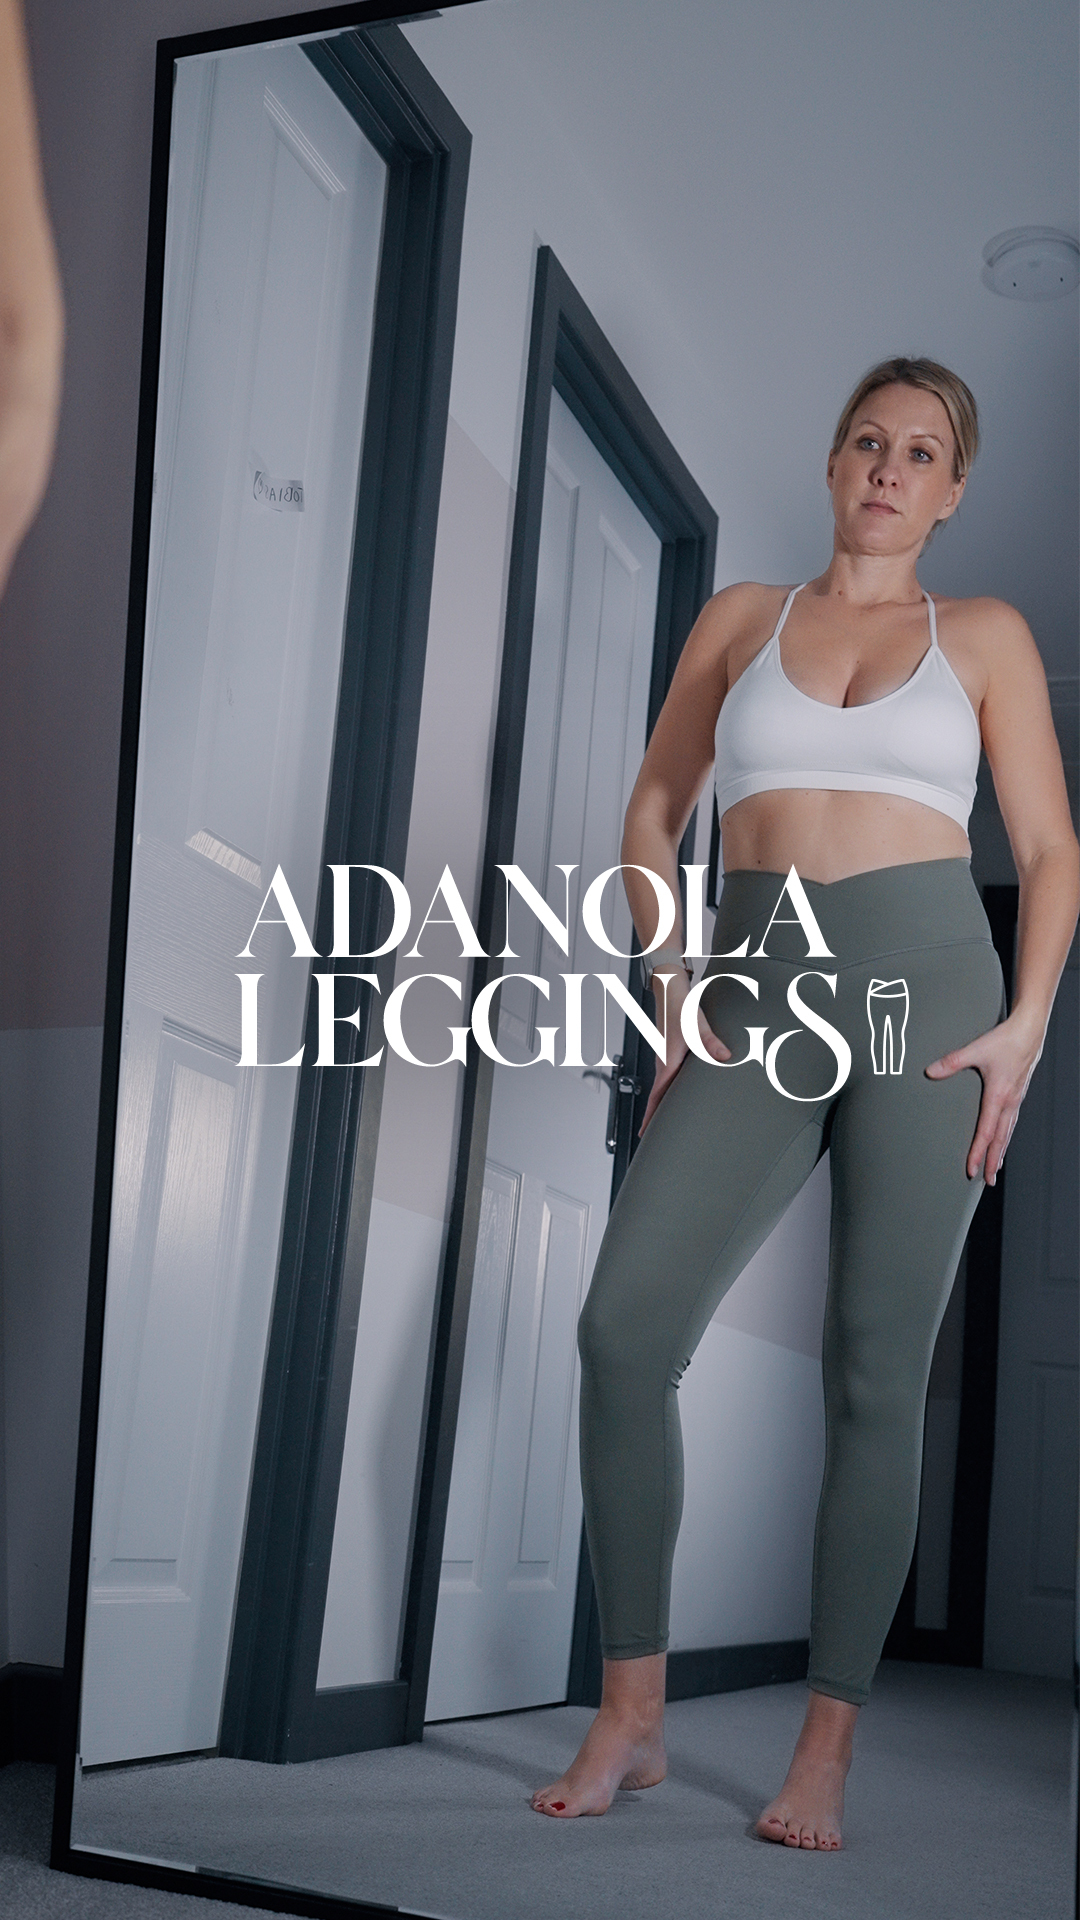 Comfort and style, Adanola leggings have you covered.